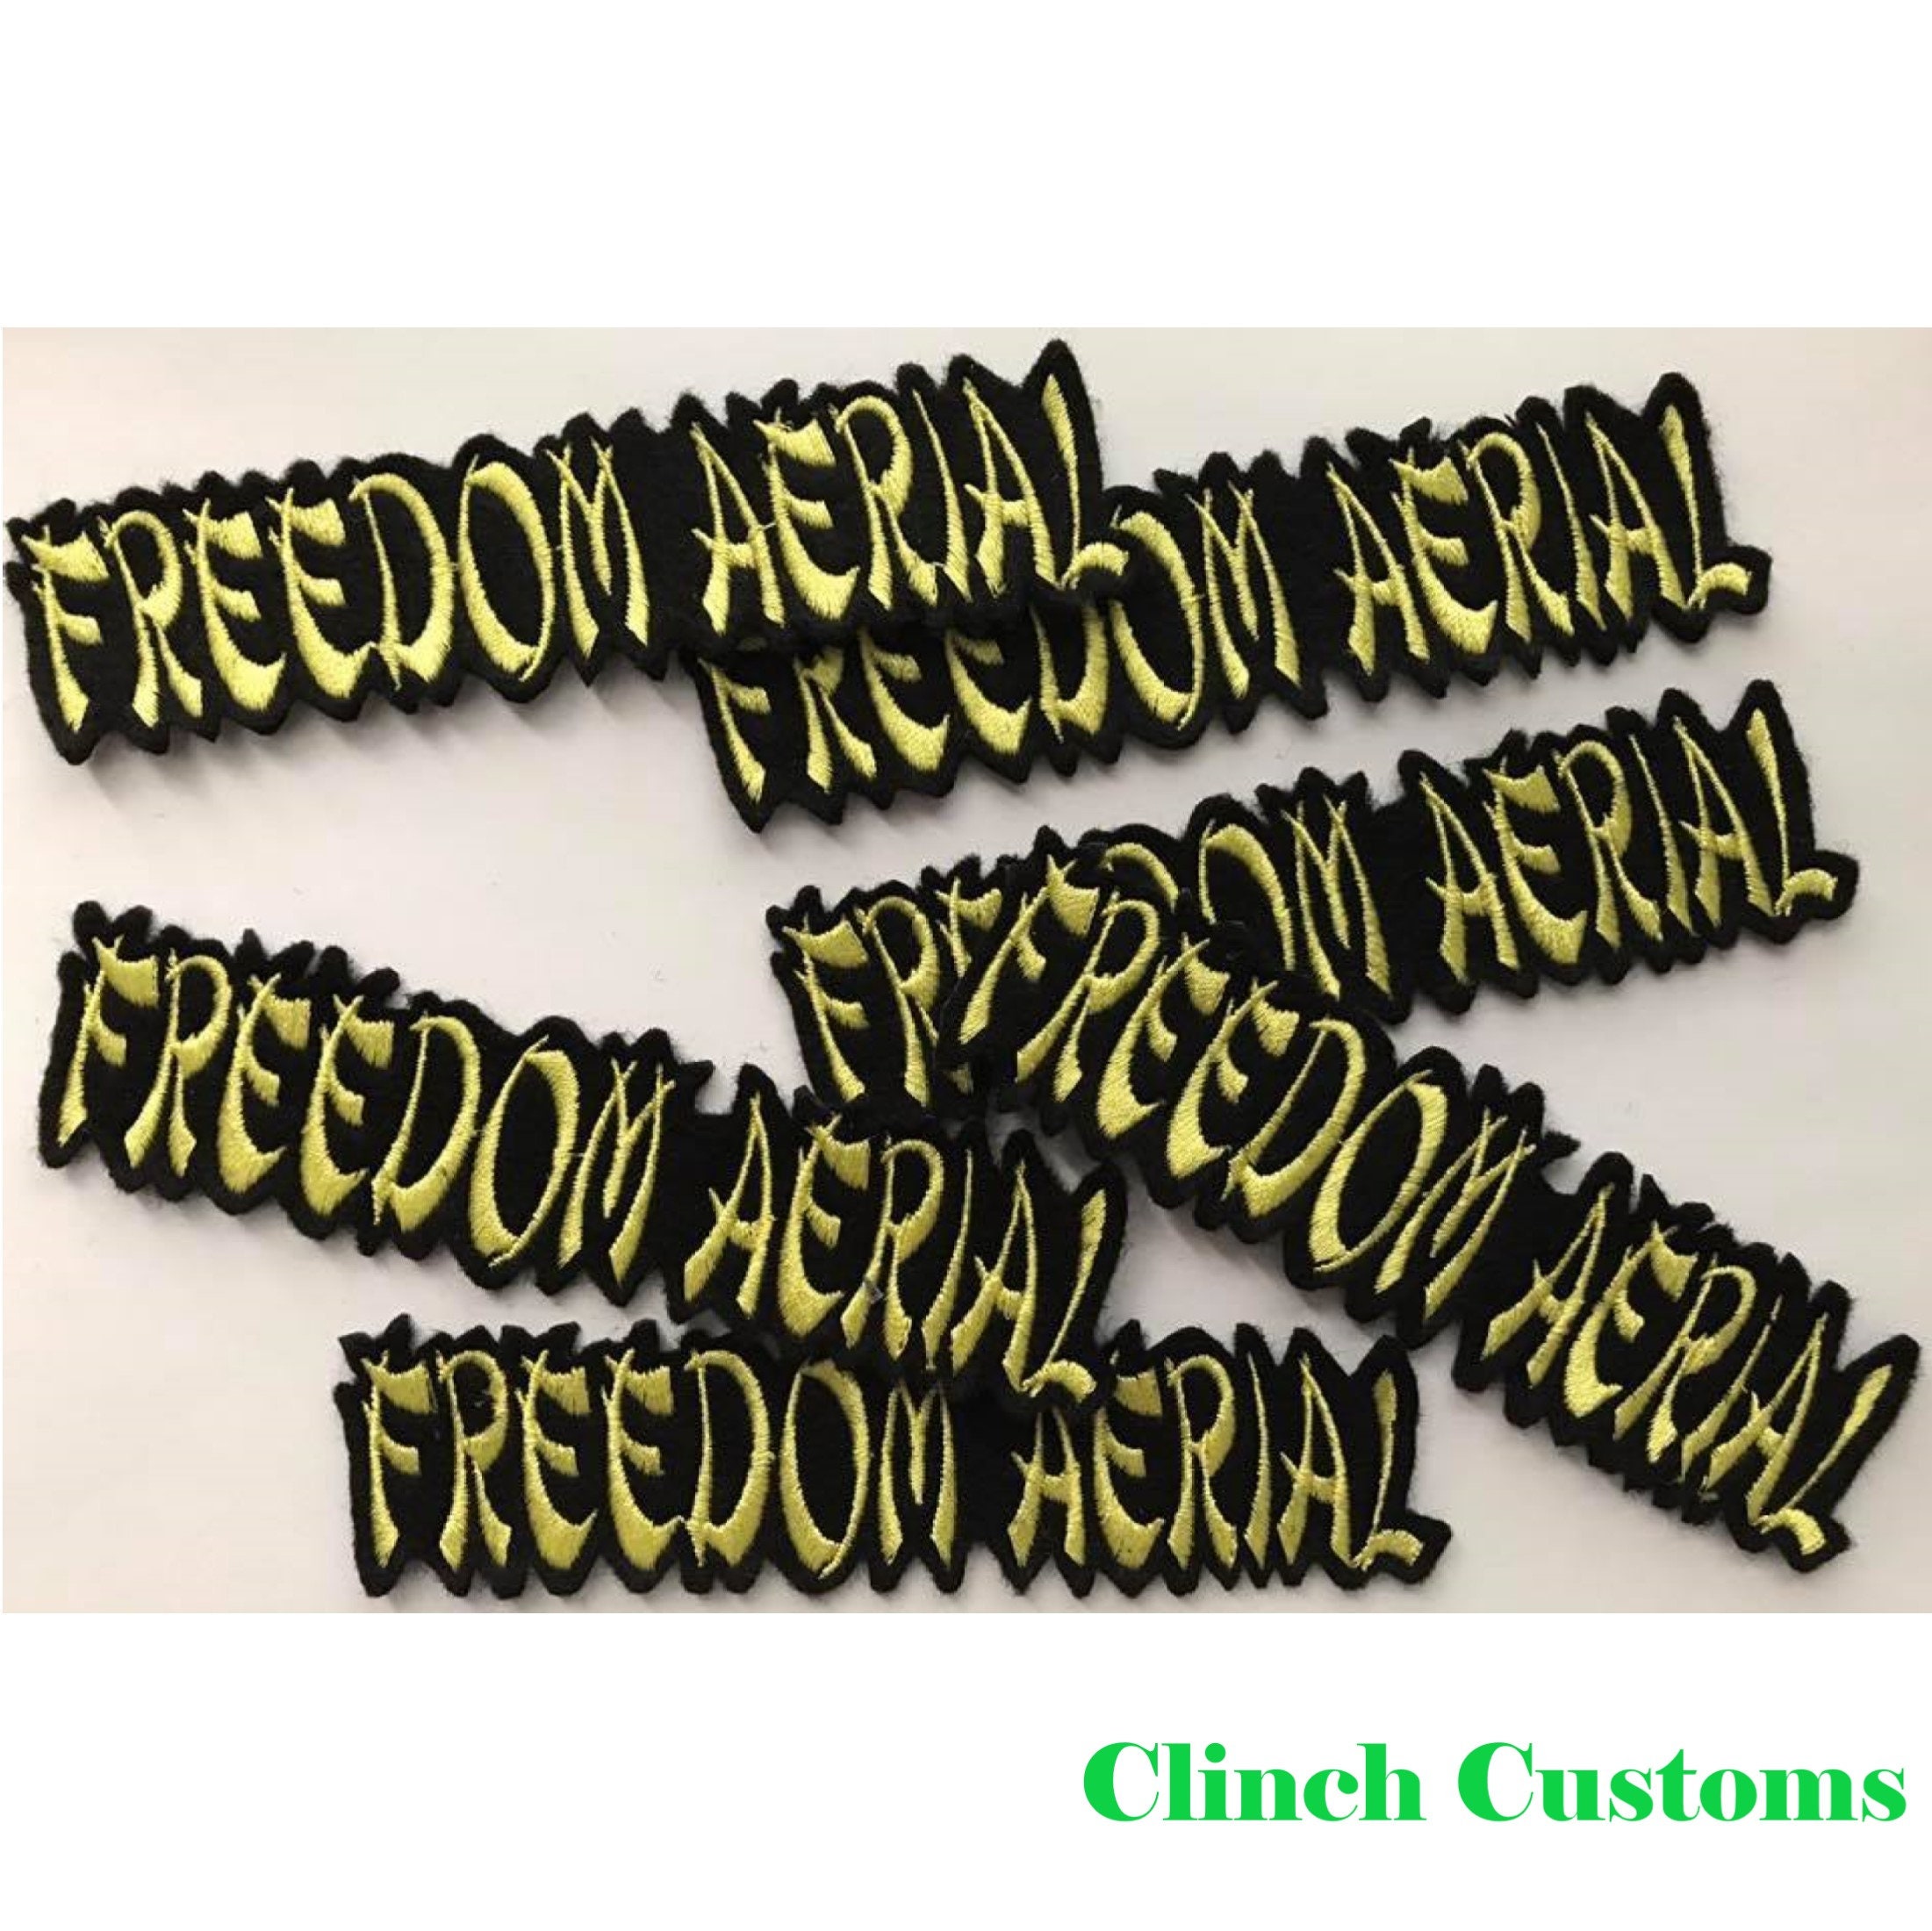 12 Custom Embroidered Die Cut Iron on Name Patches Badge Die Cut Tag on  Felt 5W